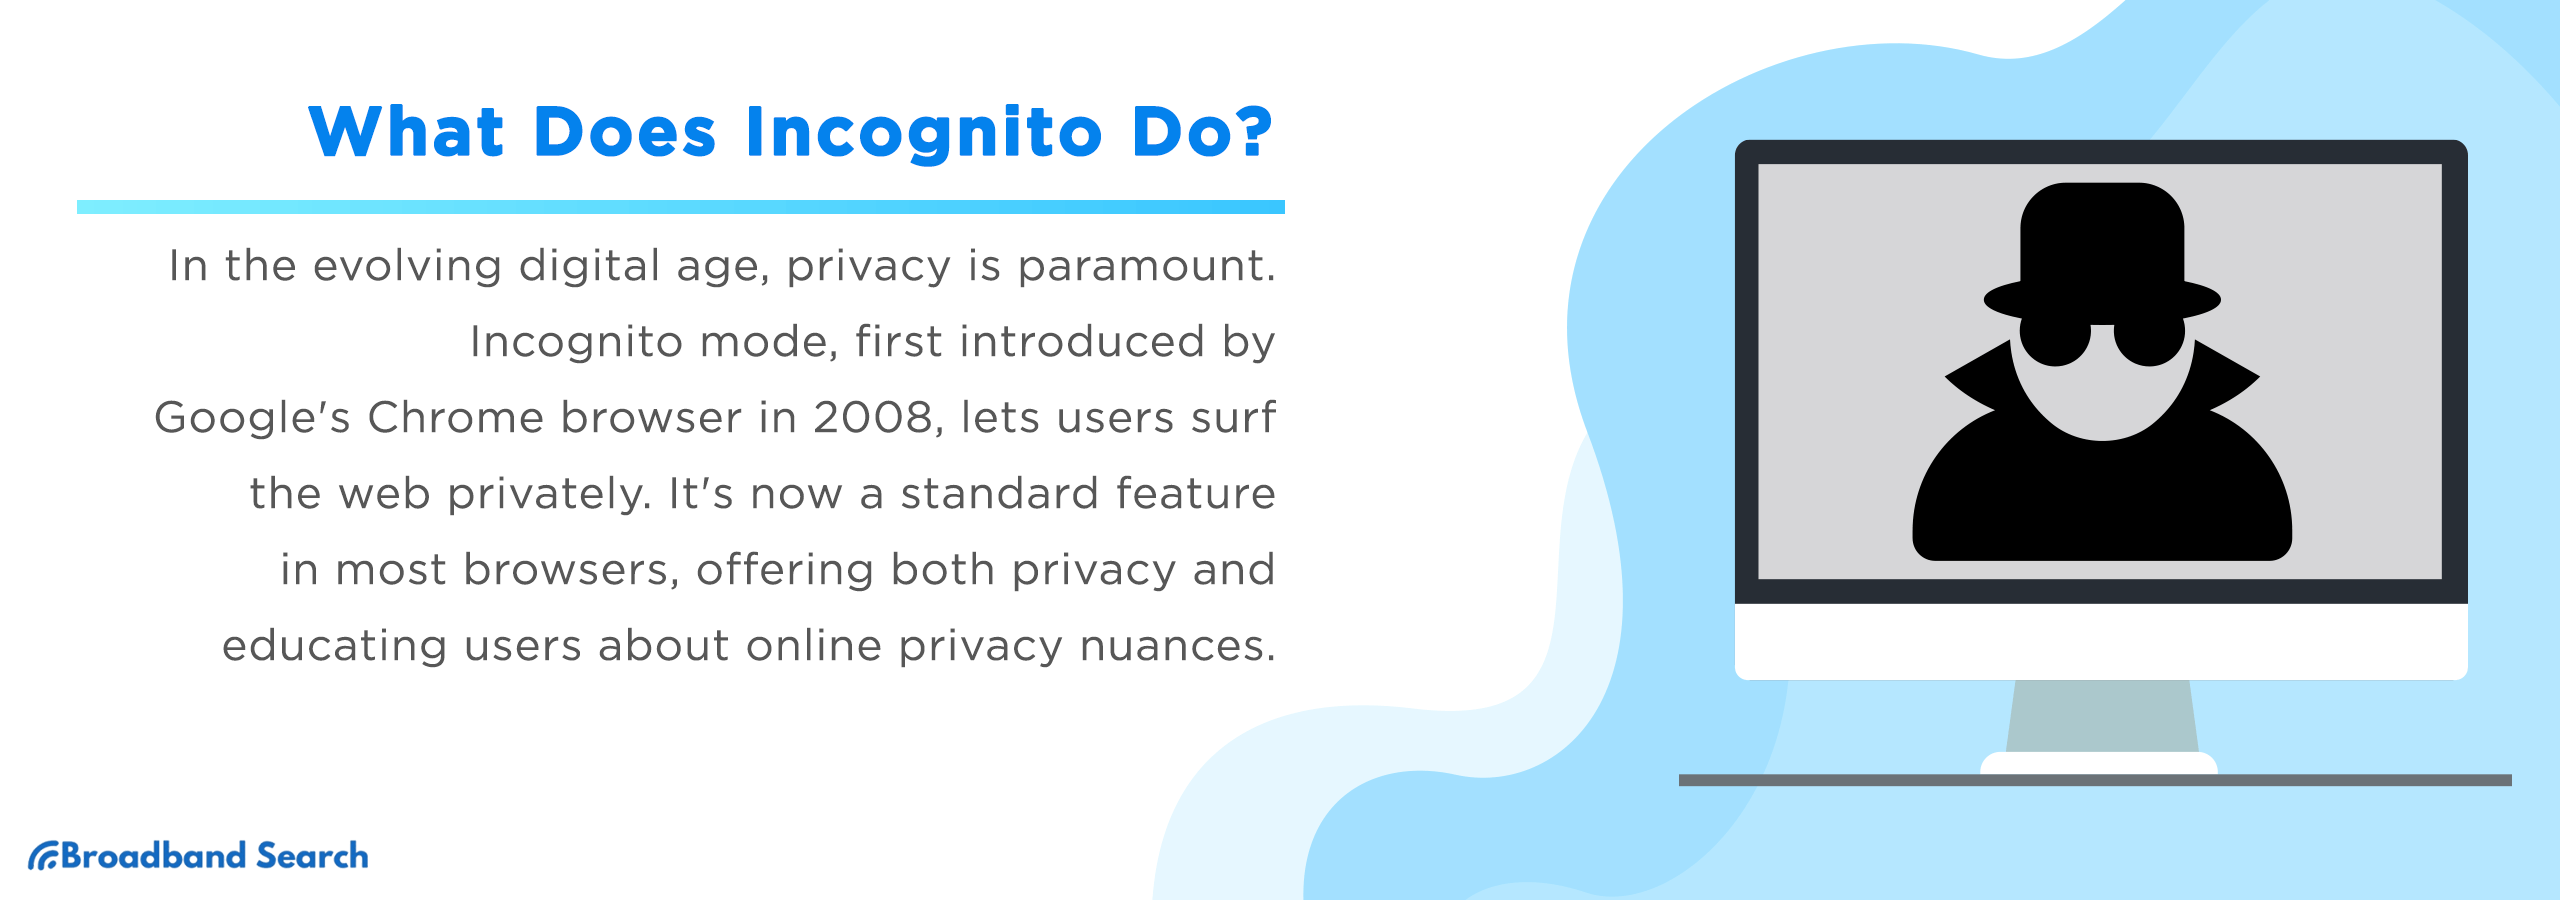 What Does Incognito Do?